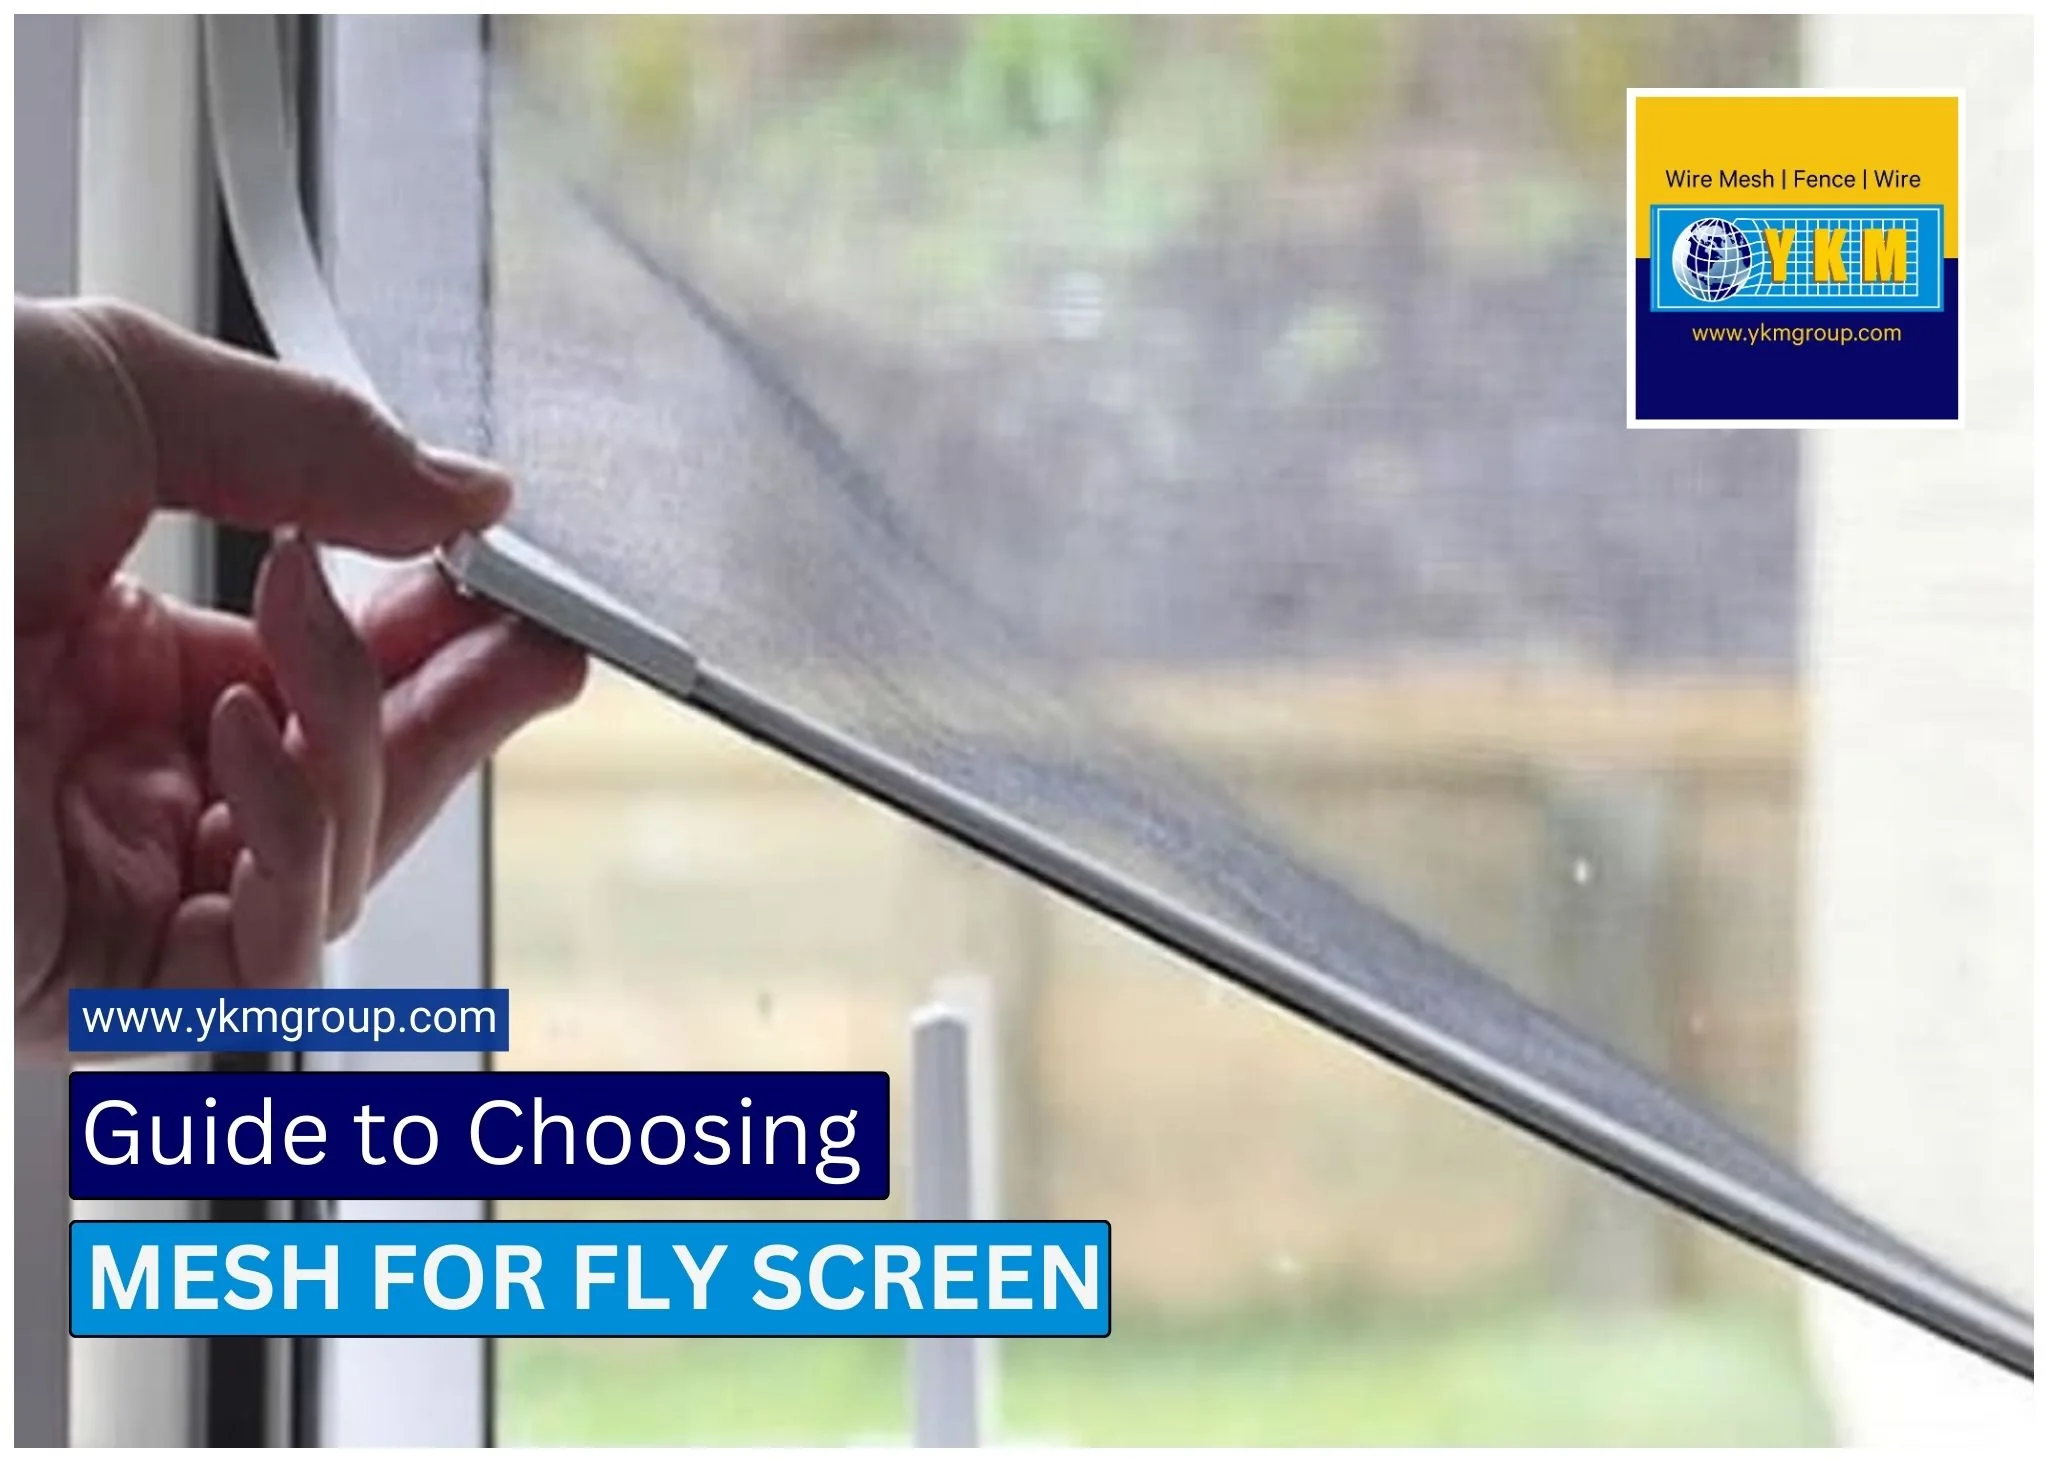 Guide to Choosing Mesh for fly screen